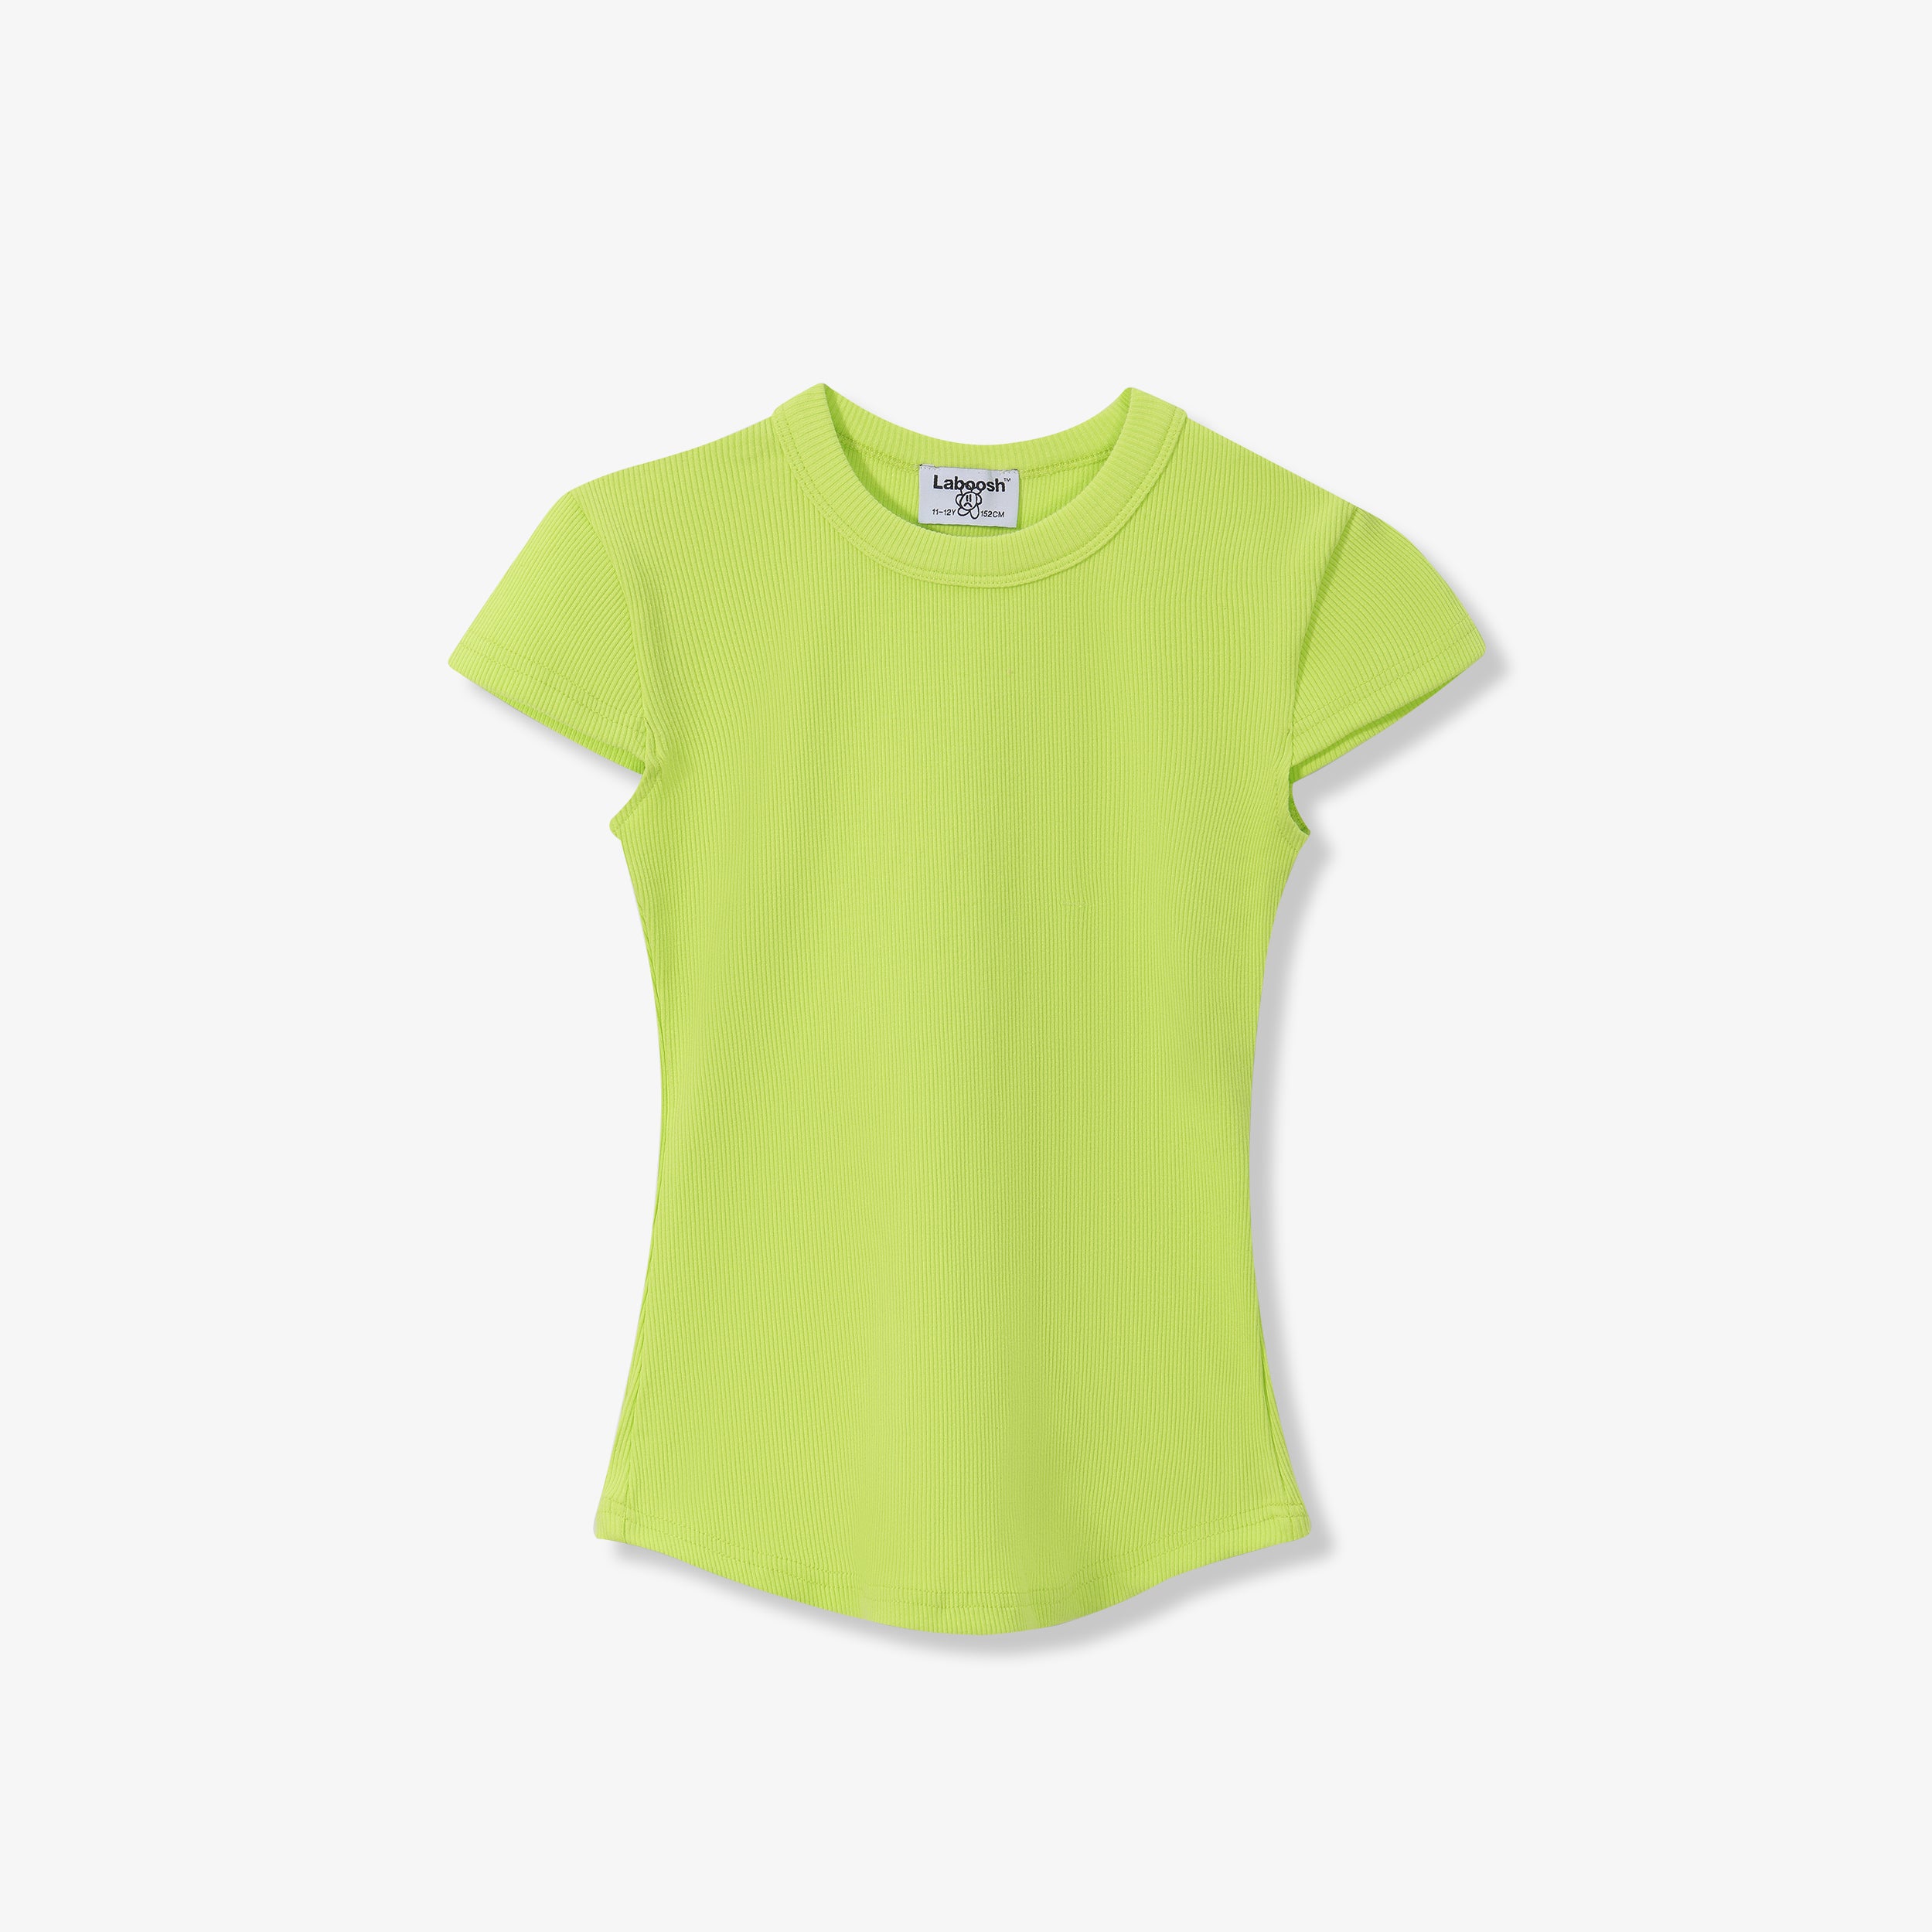 ESSENTIAL COTTON RIBBED TOP - SHORT SLEEVE